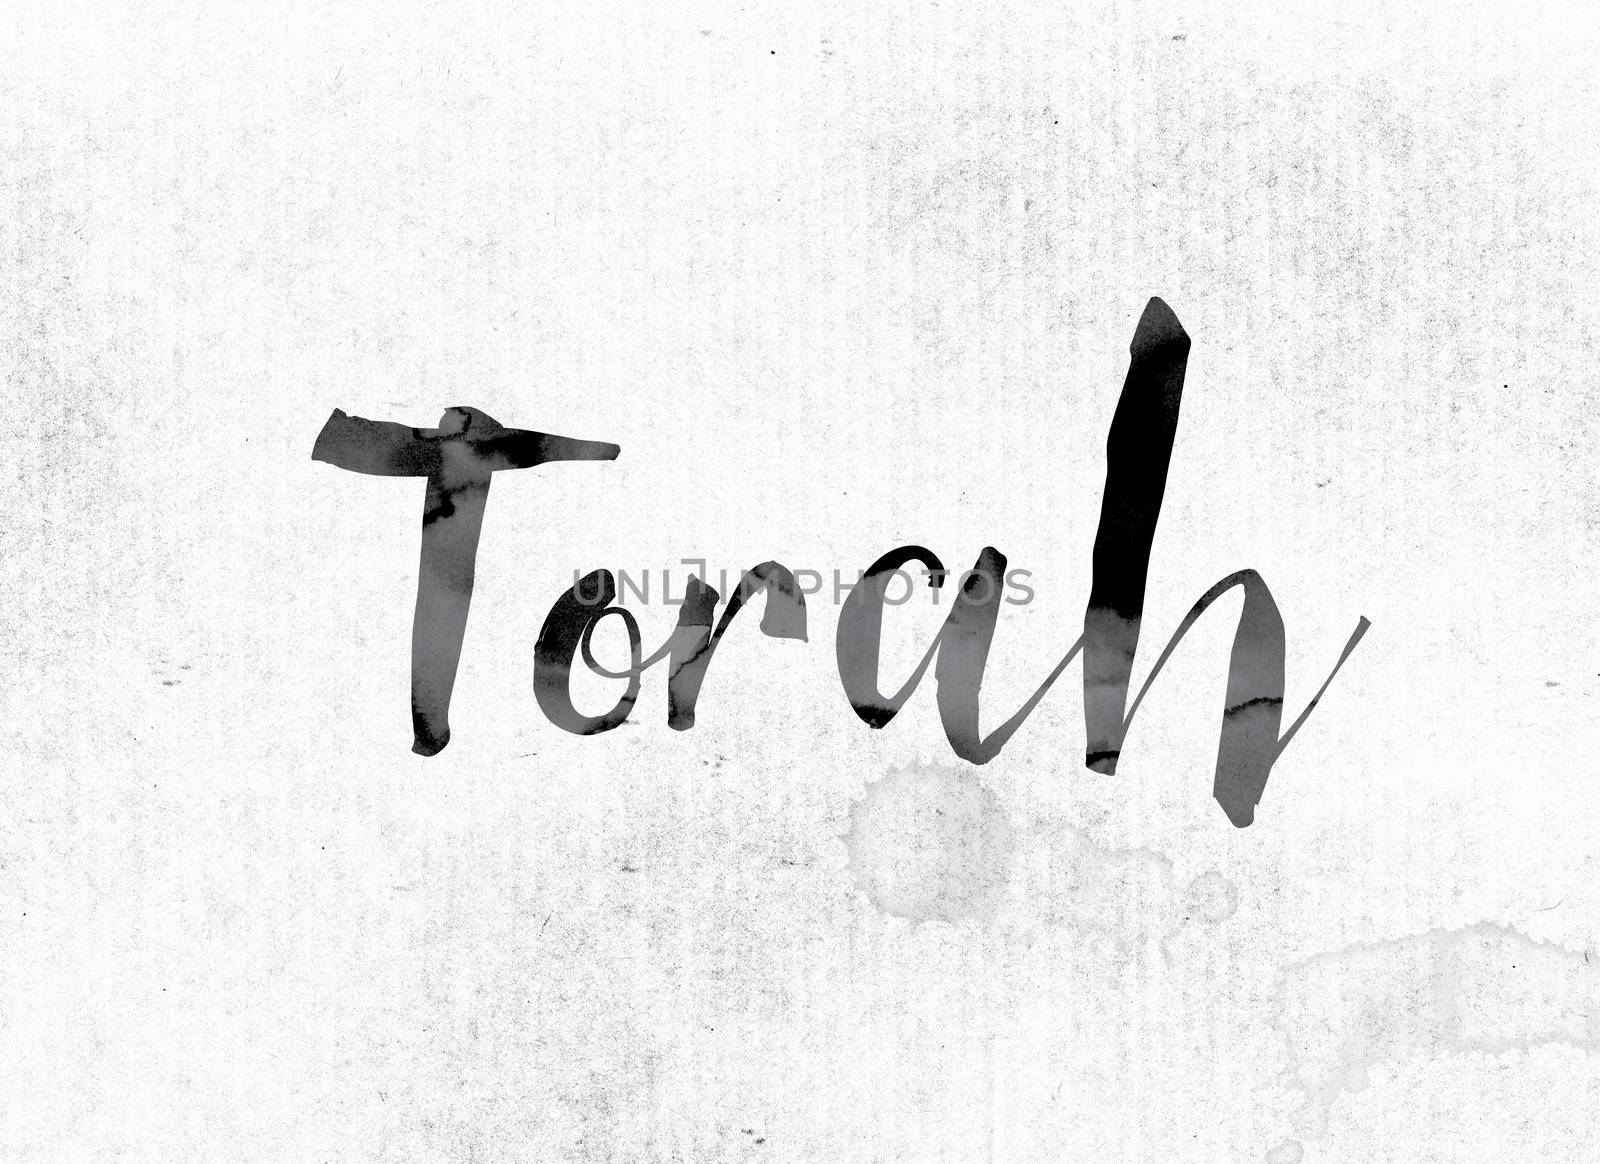 The word "Torah" concept and theme painted in watercolor ink on a white paper.